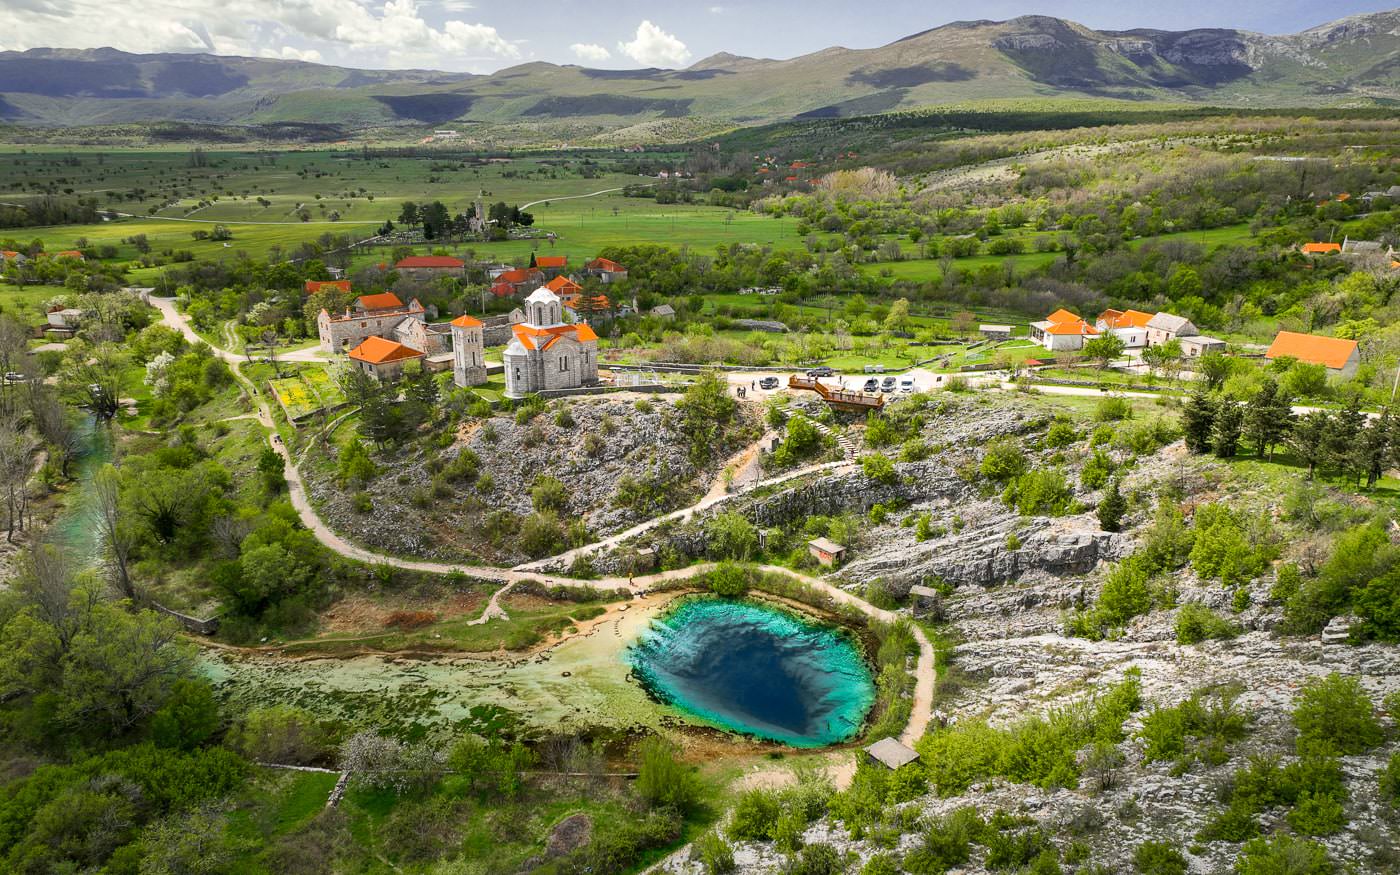 Cetina River Spring and church in the town of Omis in Croatia